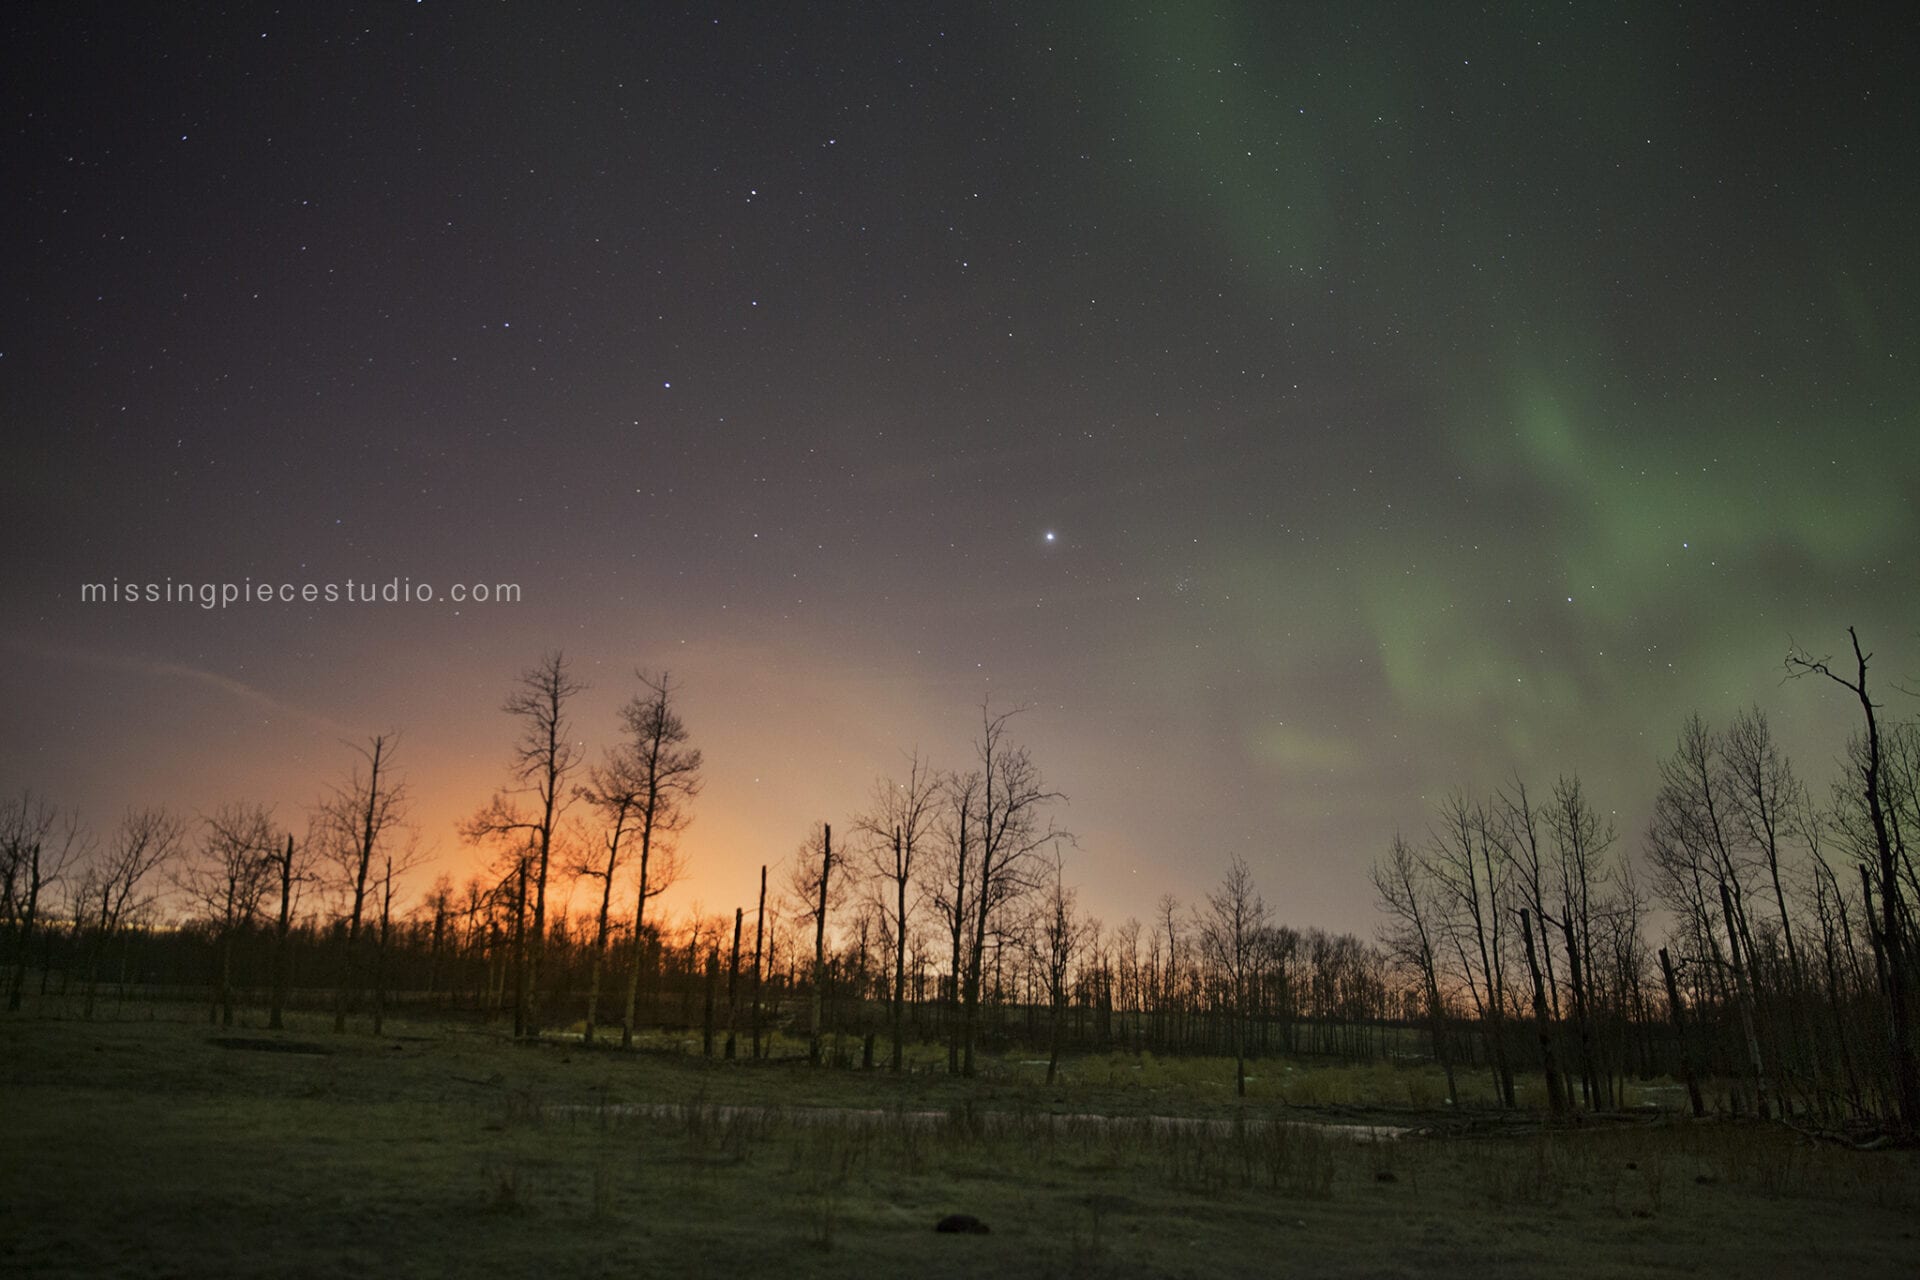 Northern lights aurora borealis) taken on a cold winter night at Elk Island in National Park